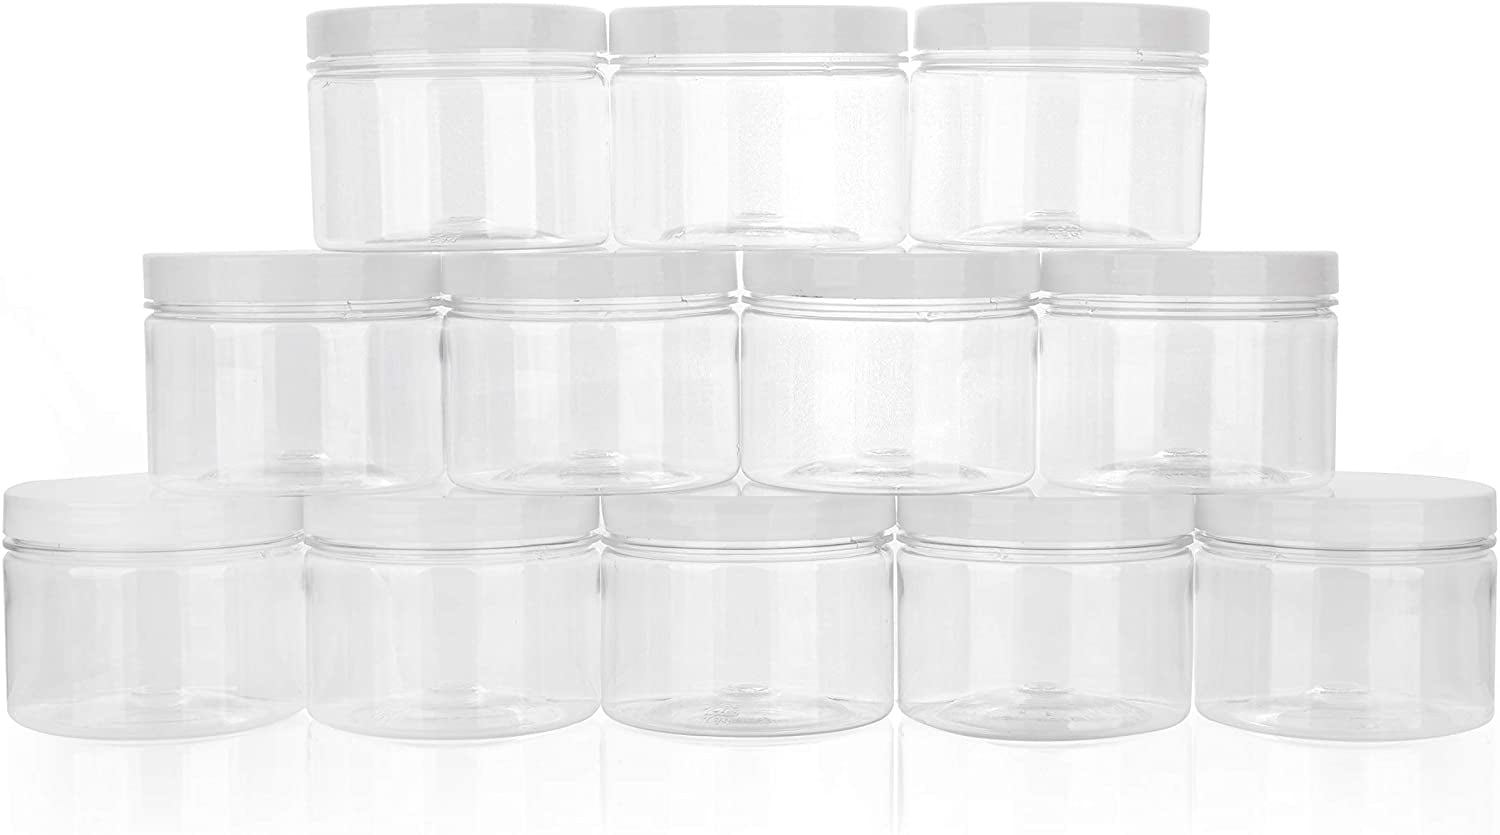 8 Oz PLASTIC JARS With Twisted Lids OLCOTT 8 Oz Clear Containers for Slime  Storage Jars Liquid Jars Lot of 1 2 5 Wide Mouth Jars for Craft 